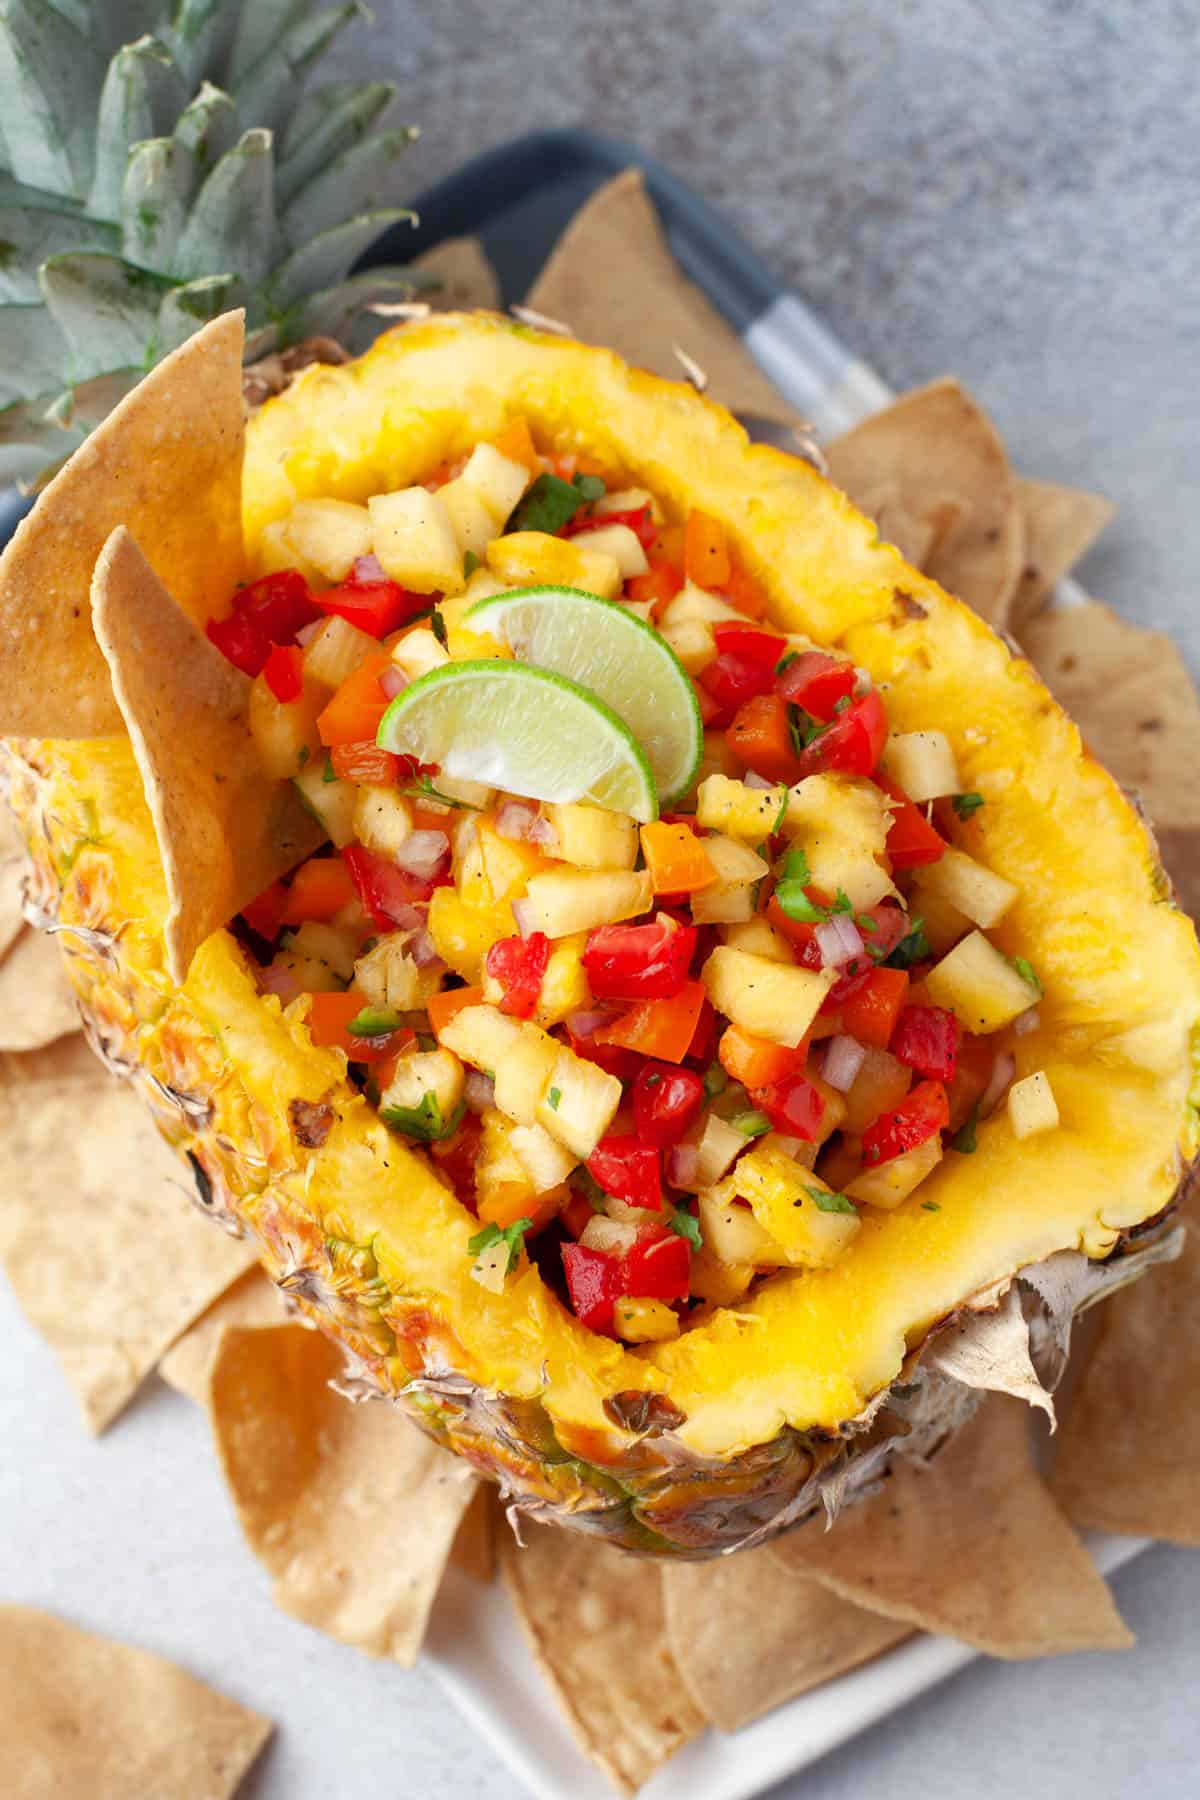 Pineapple salsa in a hollowed out pineapple with corn tortilla chips around it.